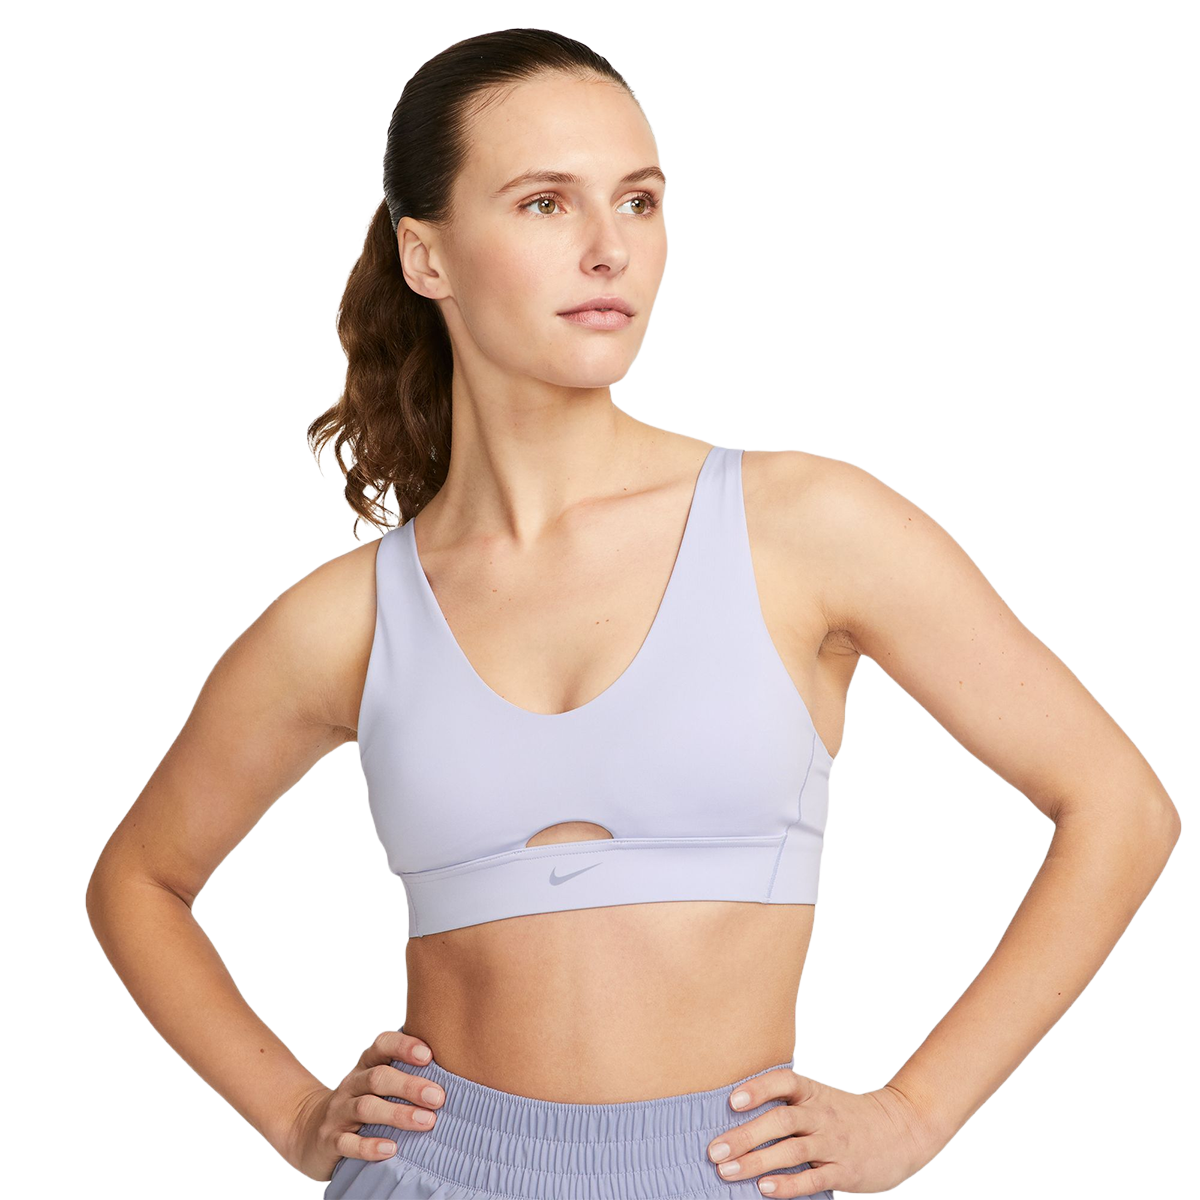 Fp Movement Every Single Time Cutout Sports Bra in Purple